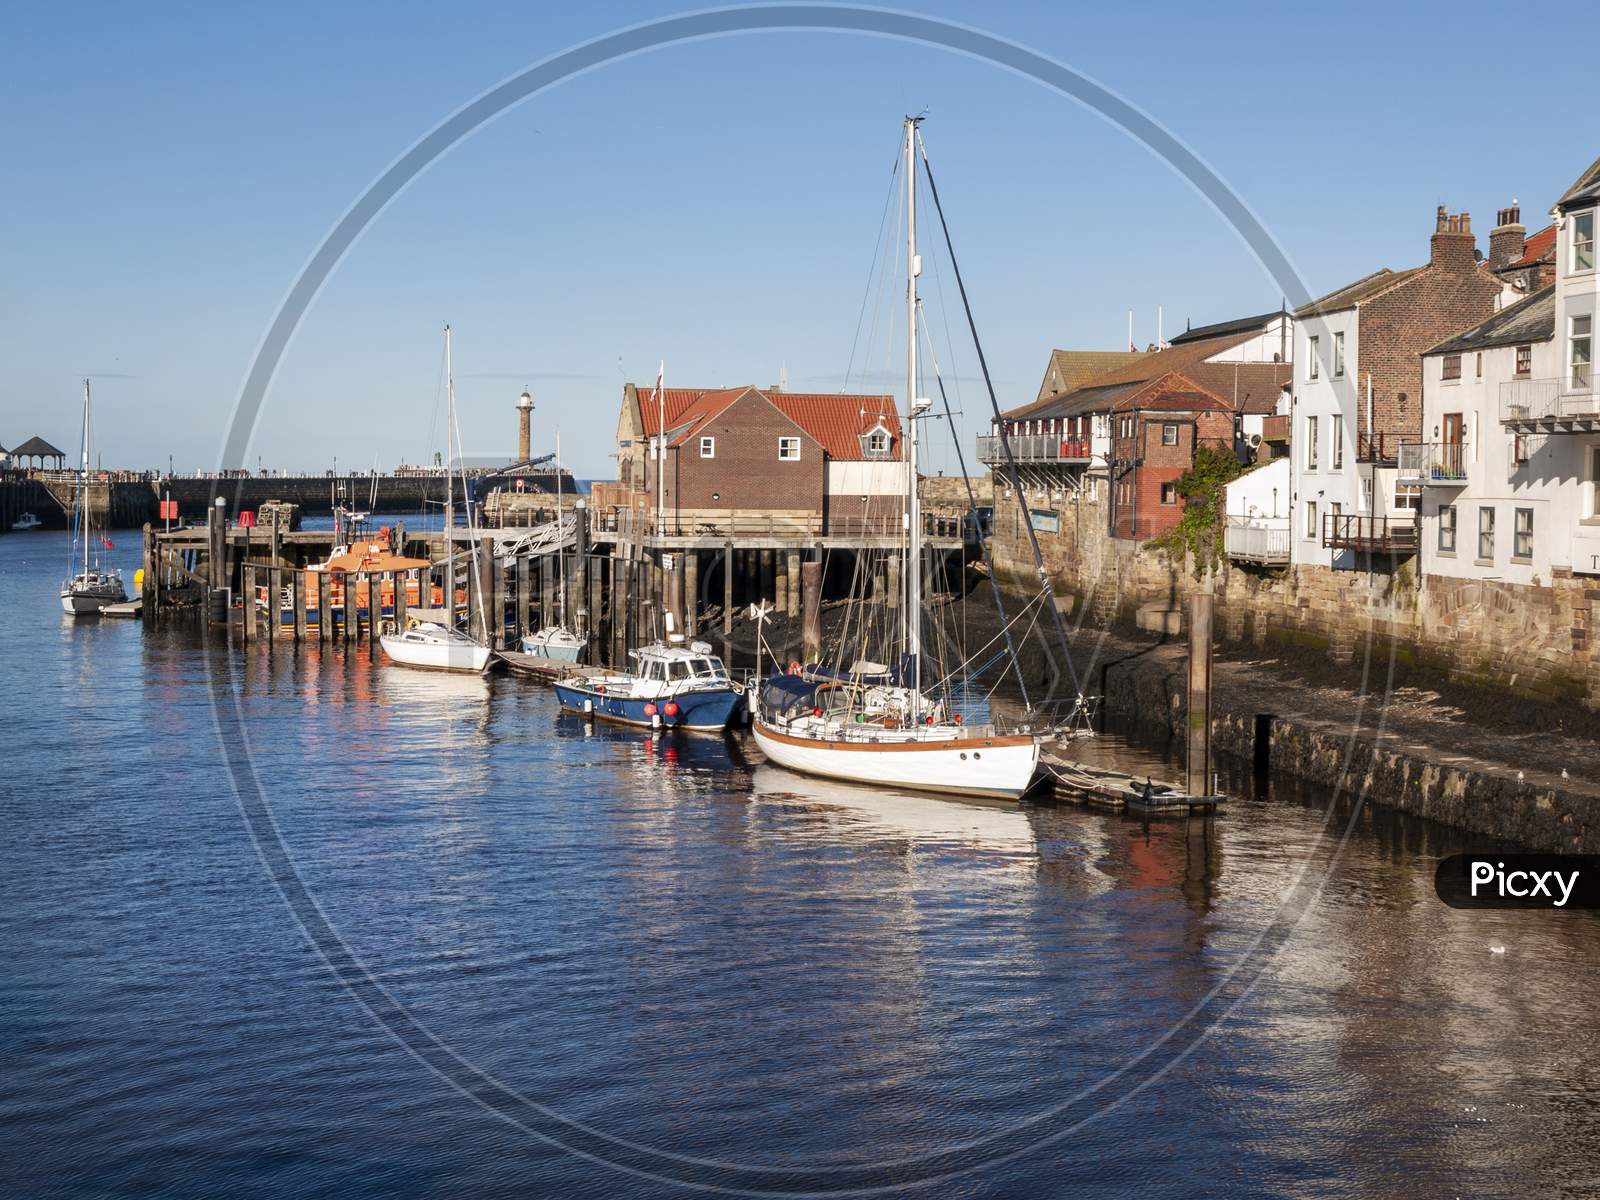 The harbour at Whitby with the buildings by the quayside and boats moored up.